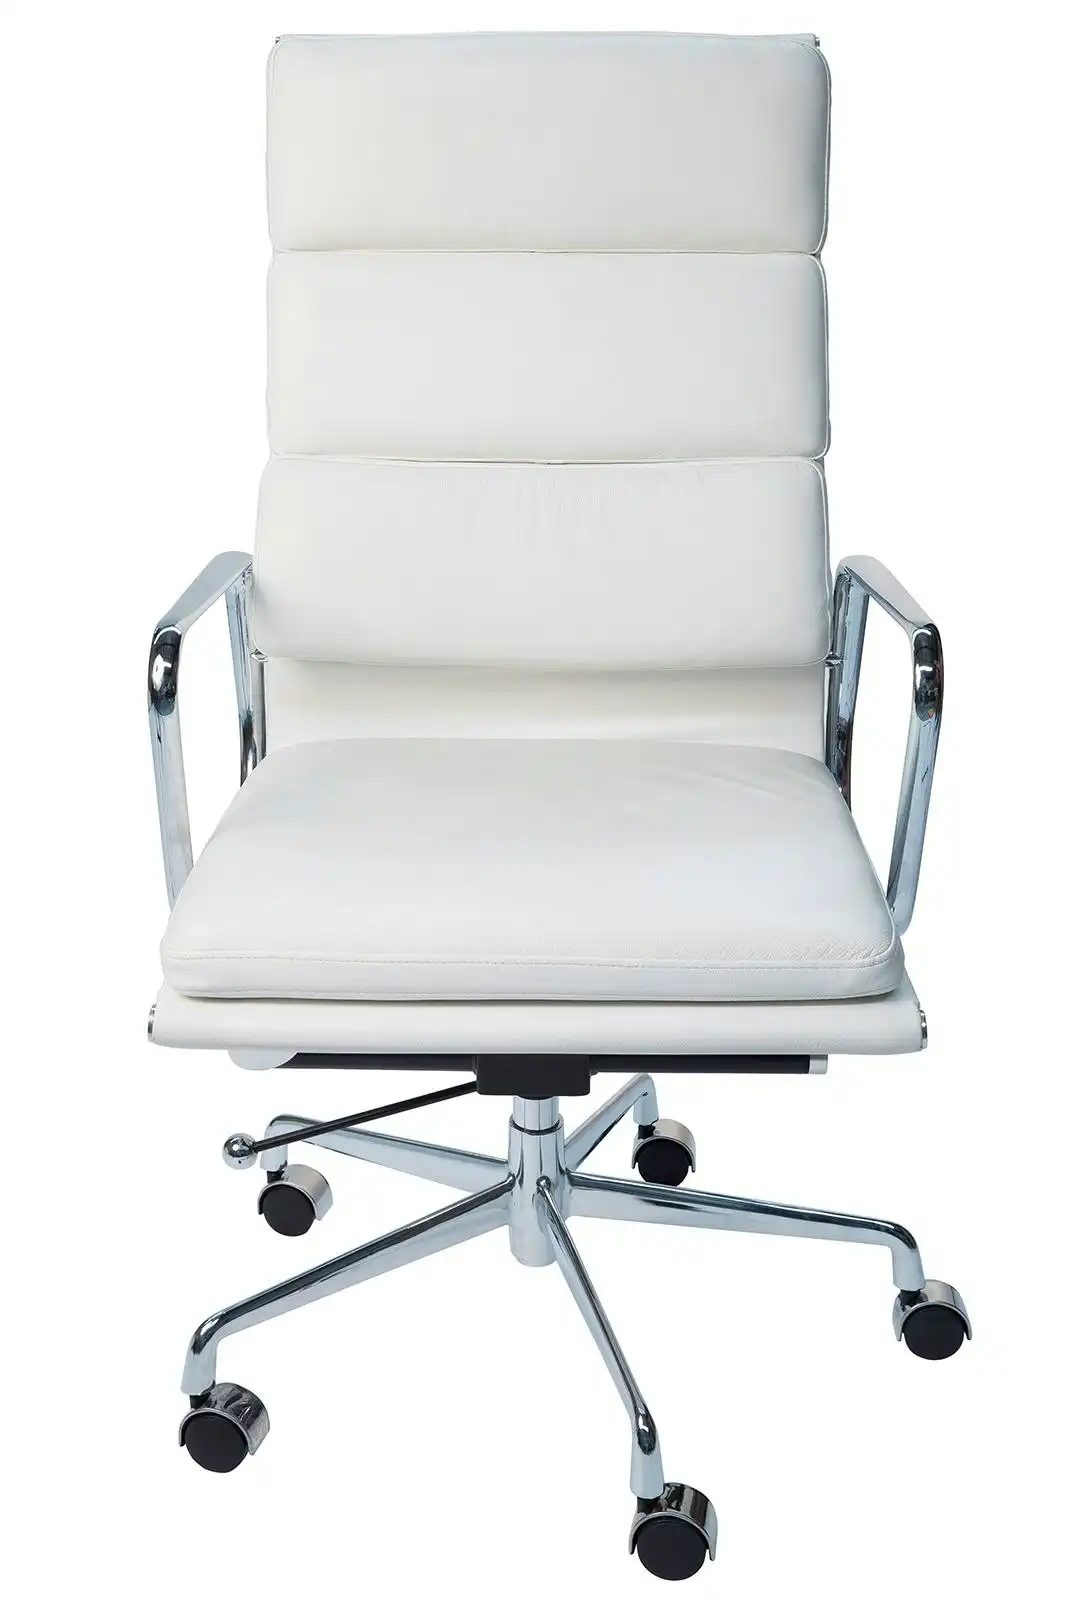 Replica Eames High Back Soft Pad Executive Desk / Office Chair